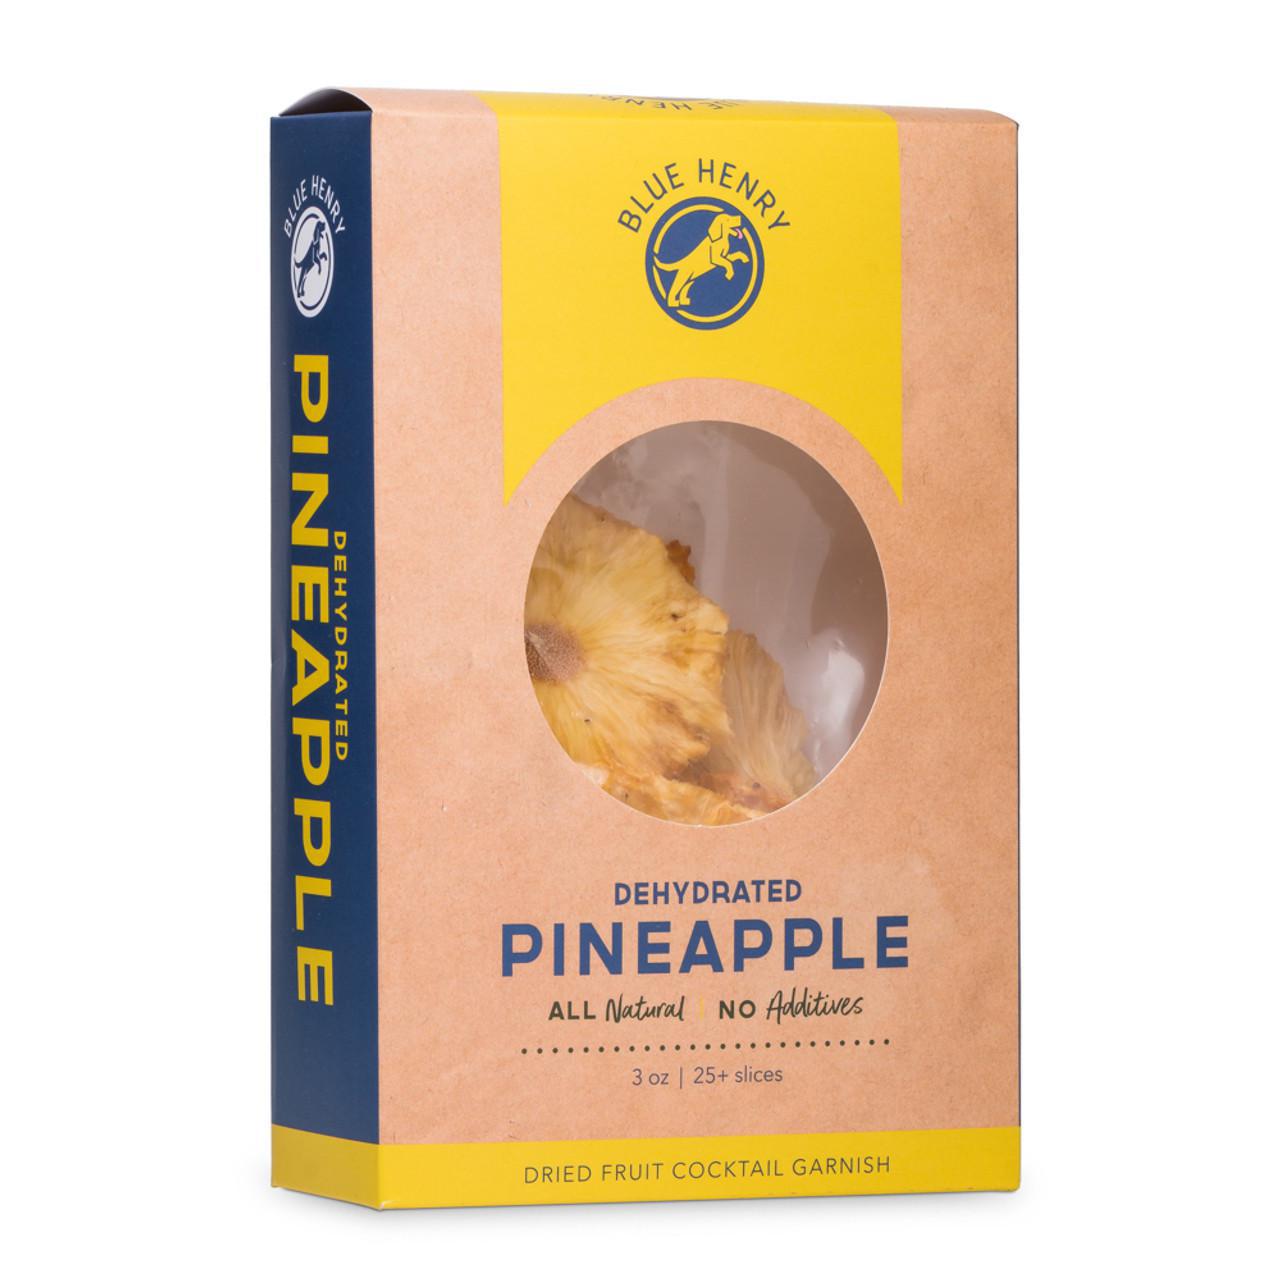 BlueHenry - Dehydrated Pineapple Cocktail Garnish (25CT) - The Epicurean Trader